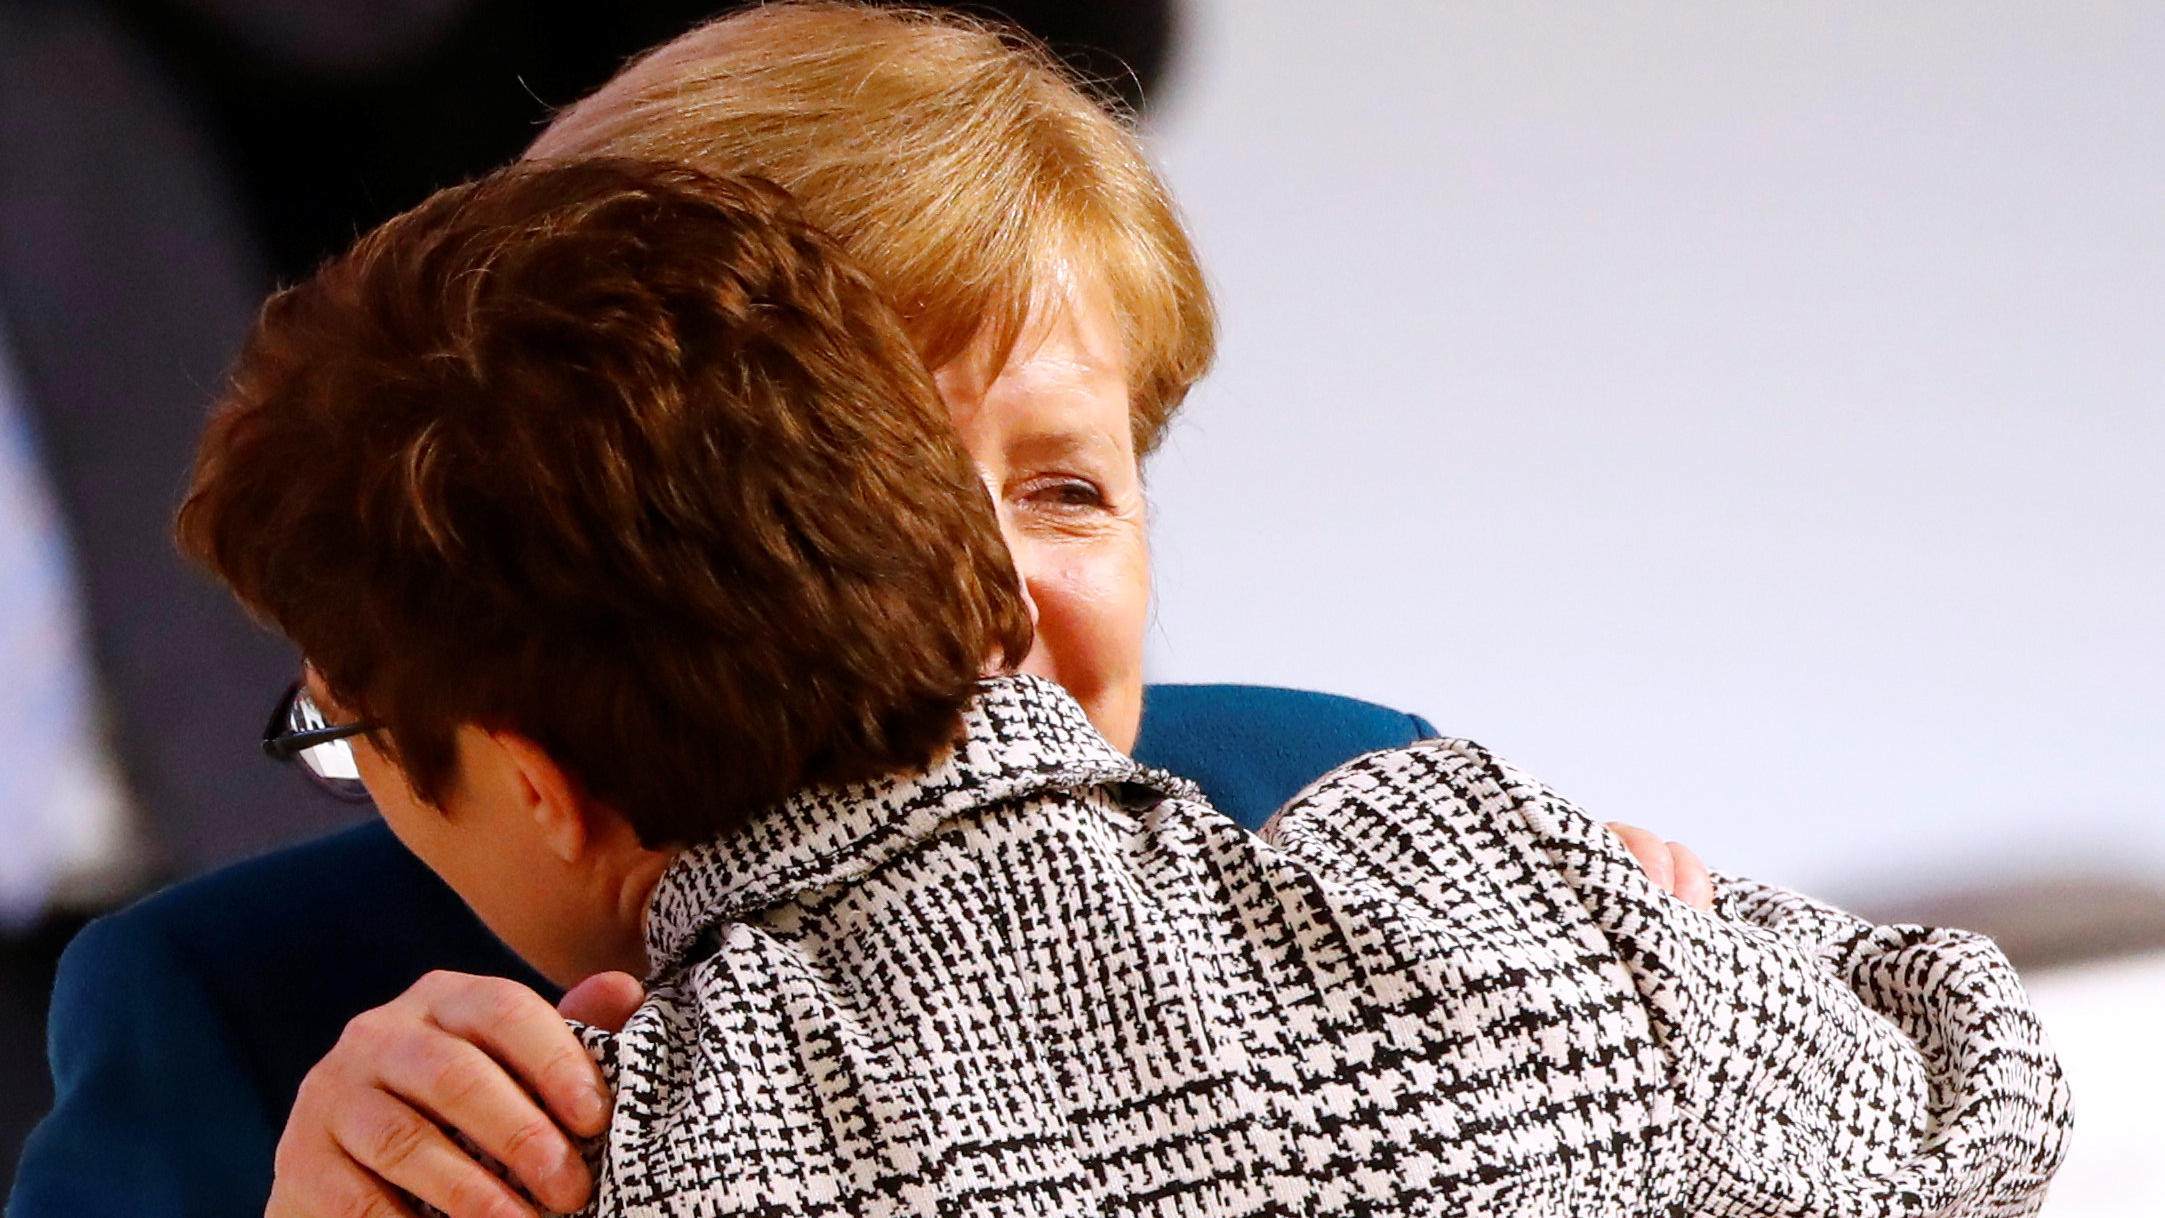 Annegret Kramp-Karrenbauer is embraced by German Chancellor Angela Merkel after being elected as the party leader during the Christian Democratic Union (CDU) party congress in Hamburg, Germany, December 7, 2018. REUTERS/Fabrizio Bensch